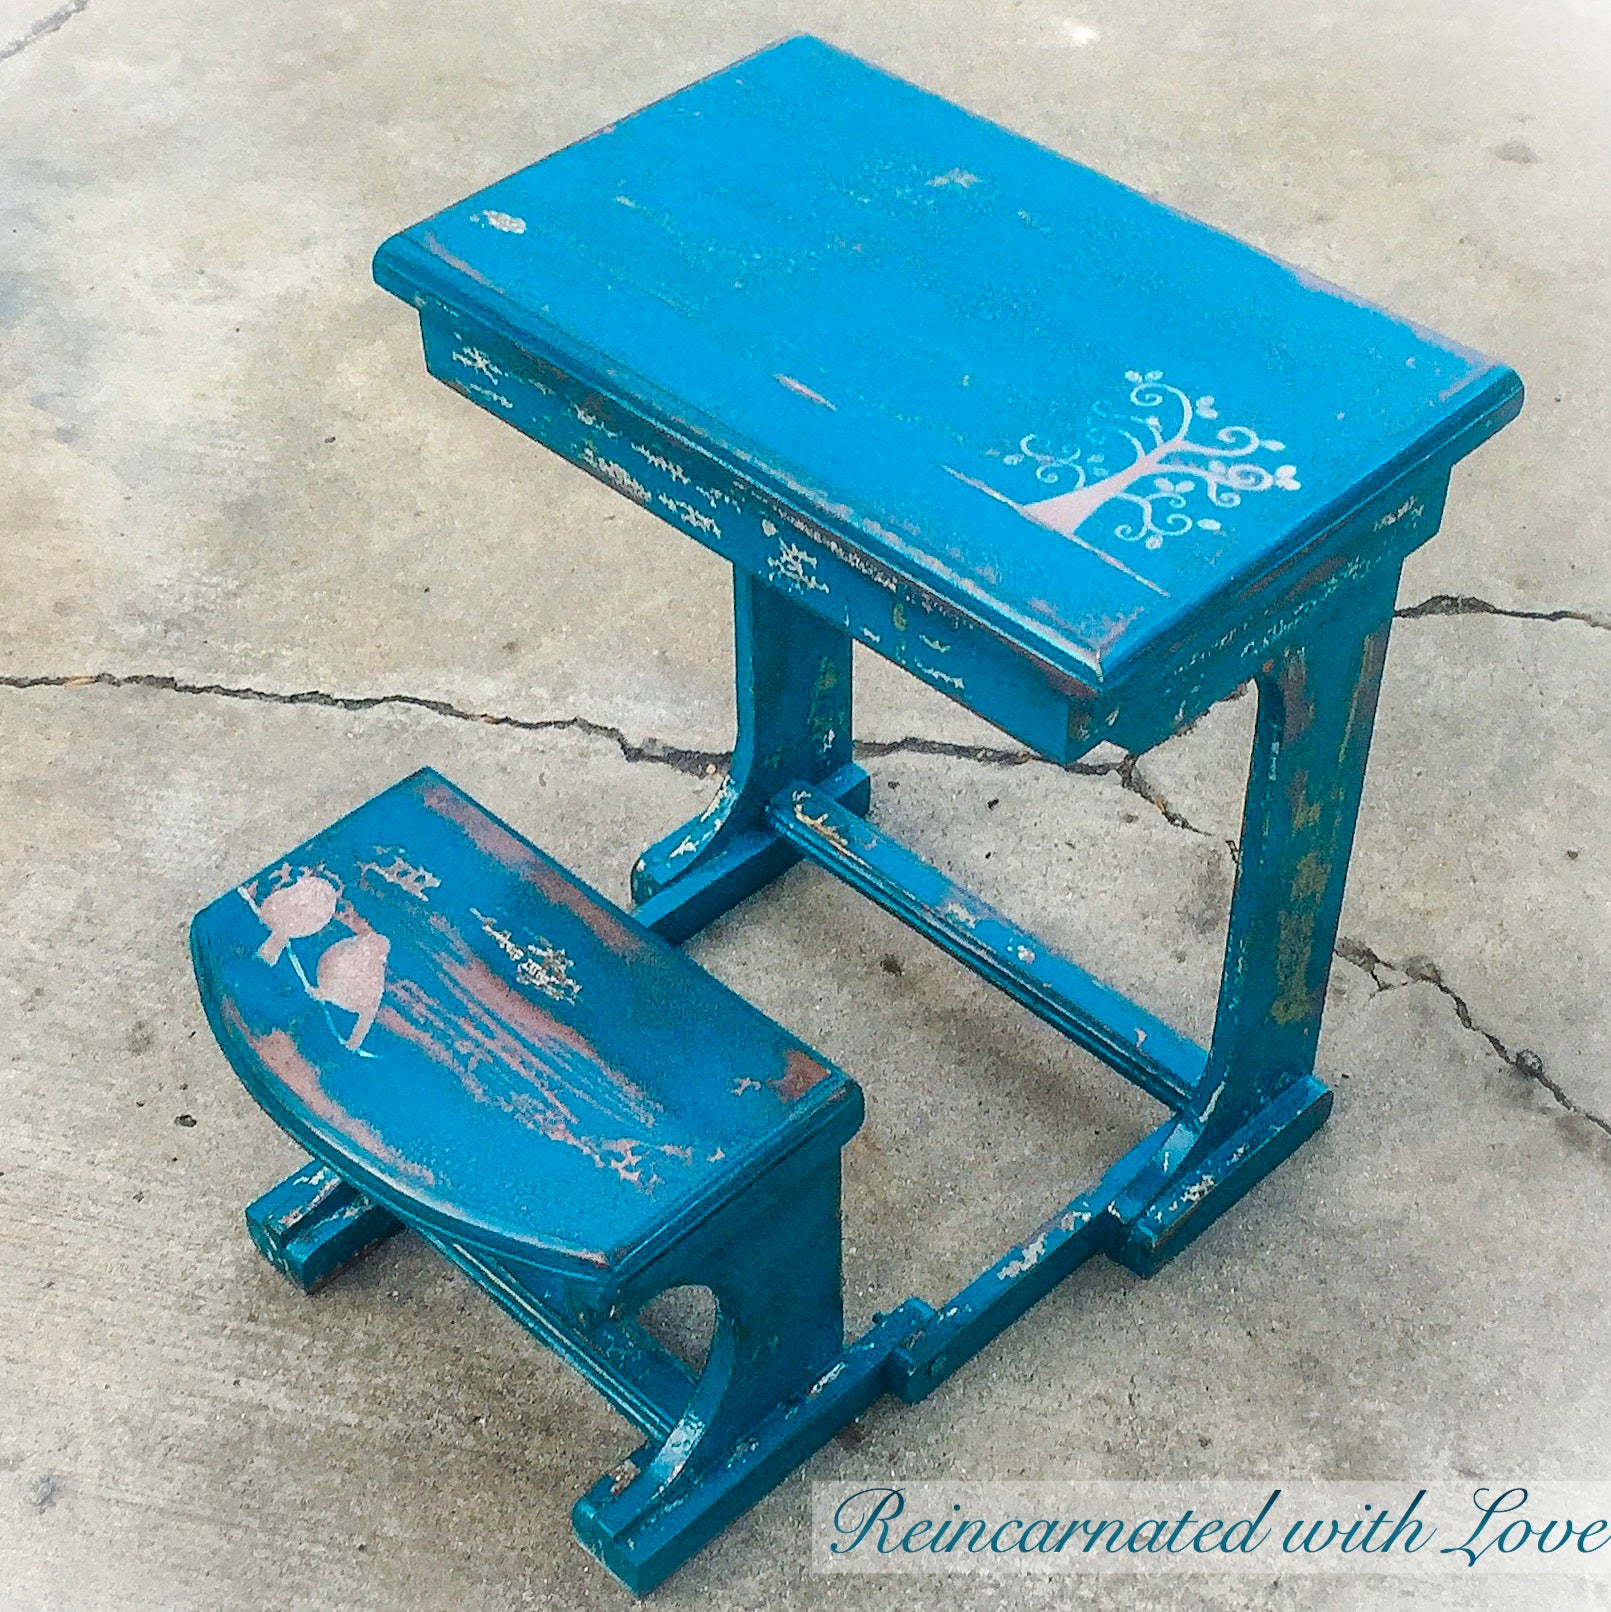 An antique, child’s desk made of solid wood. The desk is painted in a distressed, blue finish with small, bird accents.